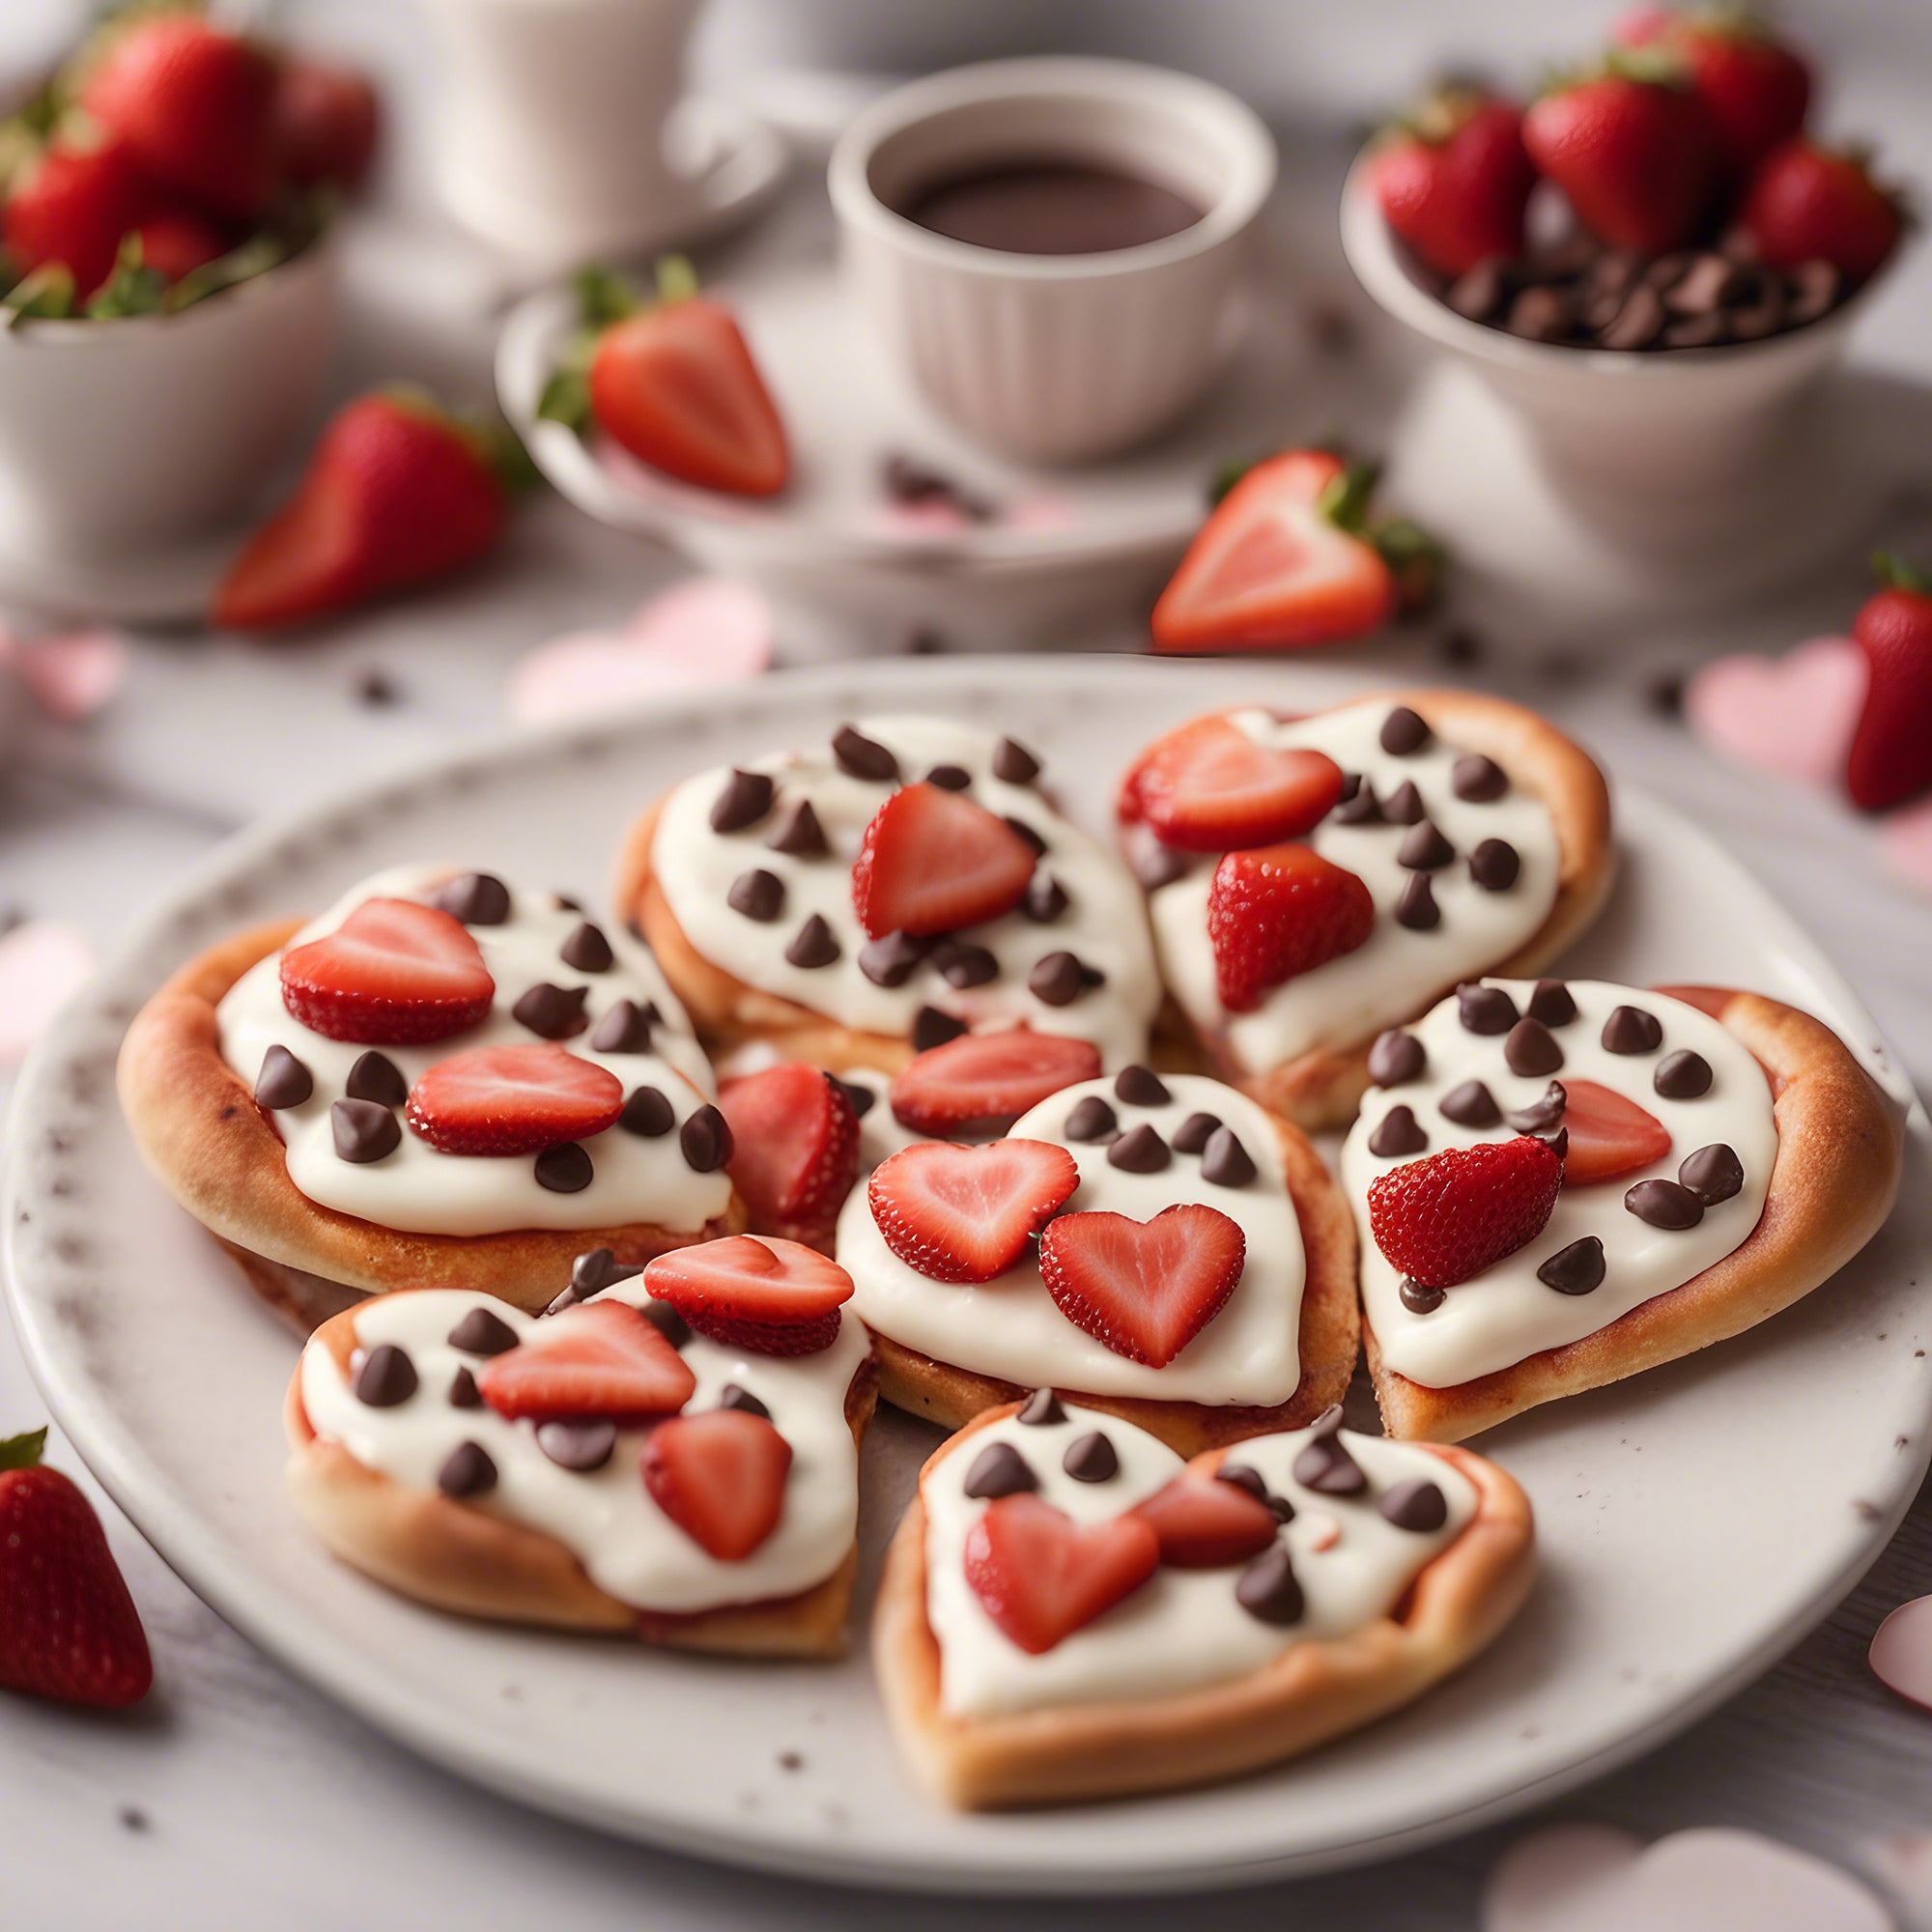 Spread the Love with Valentine's Day Sweetheart Mini Pizzas